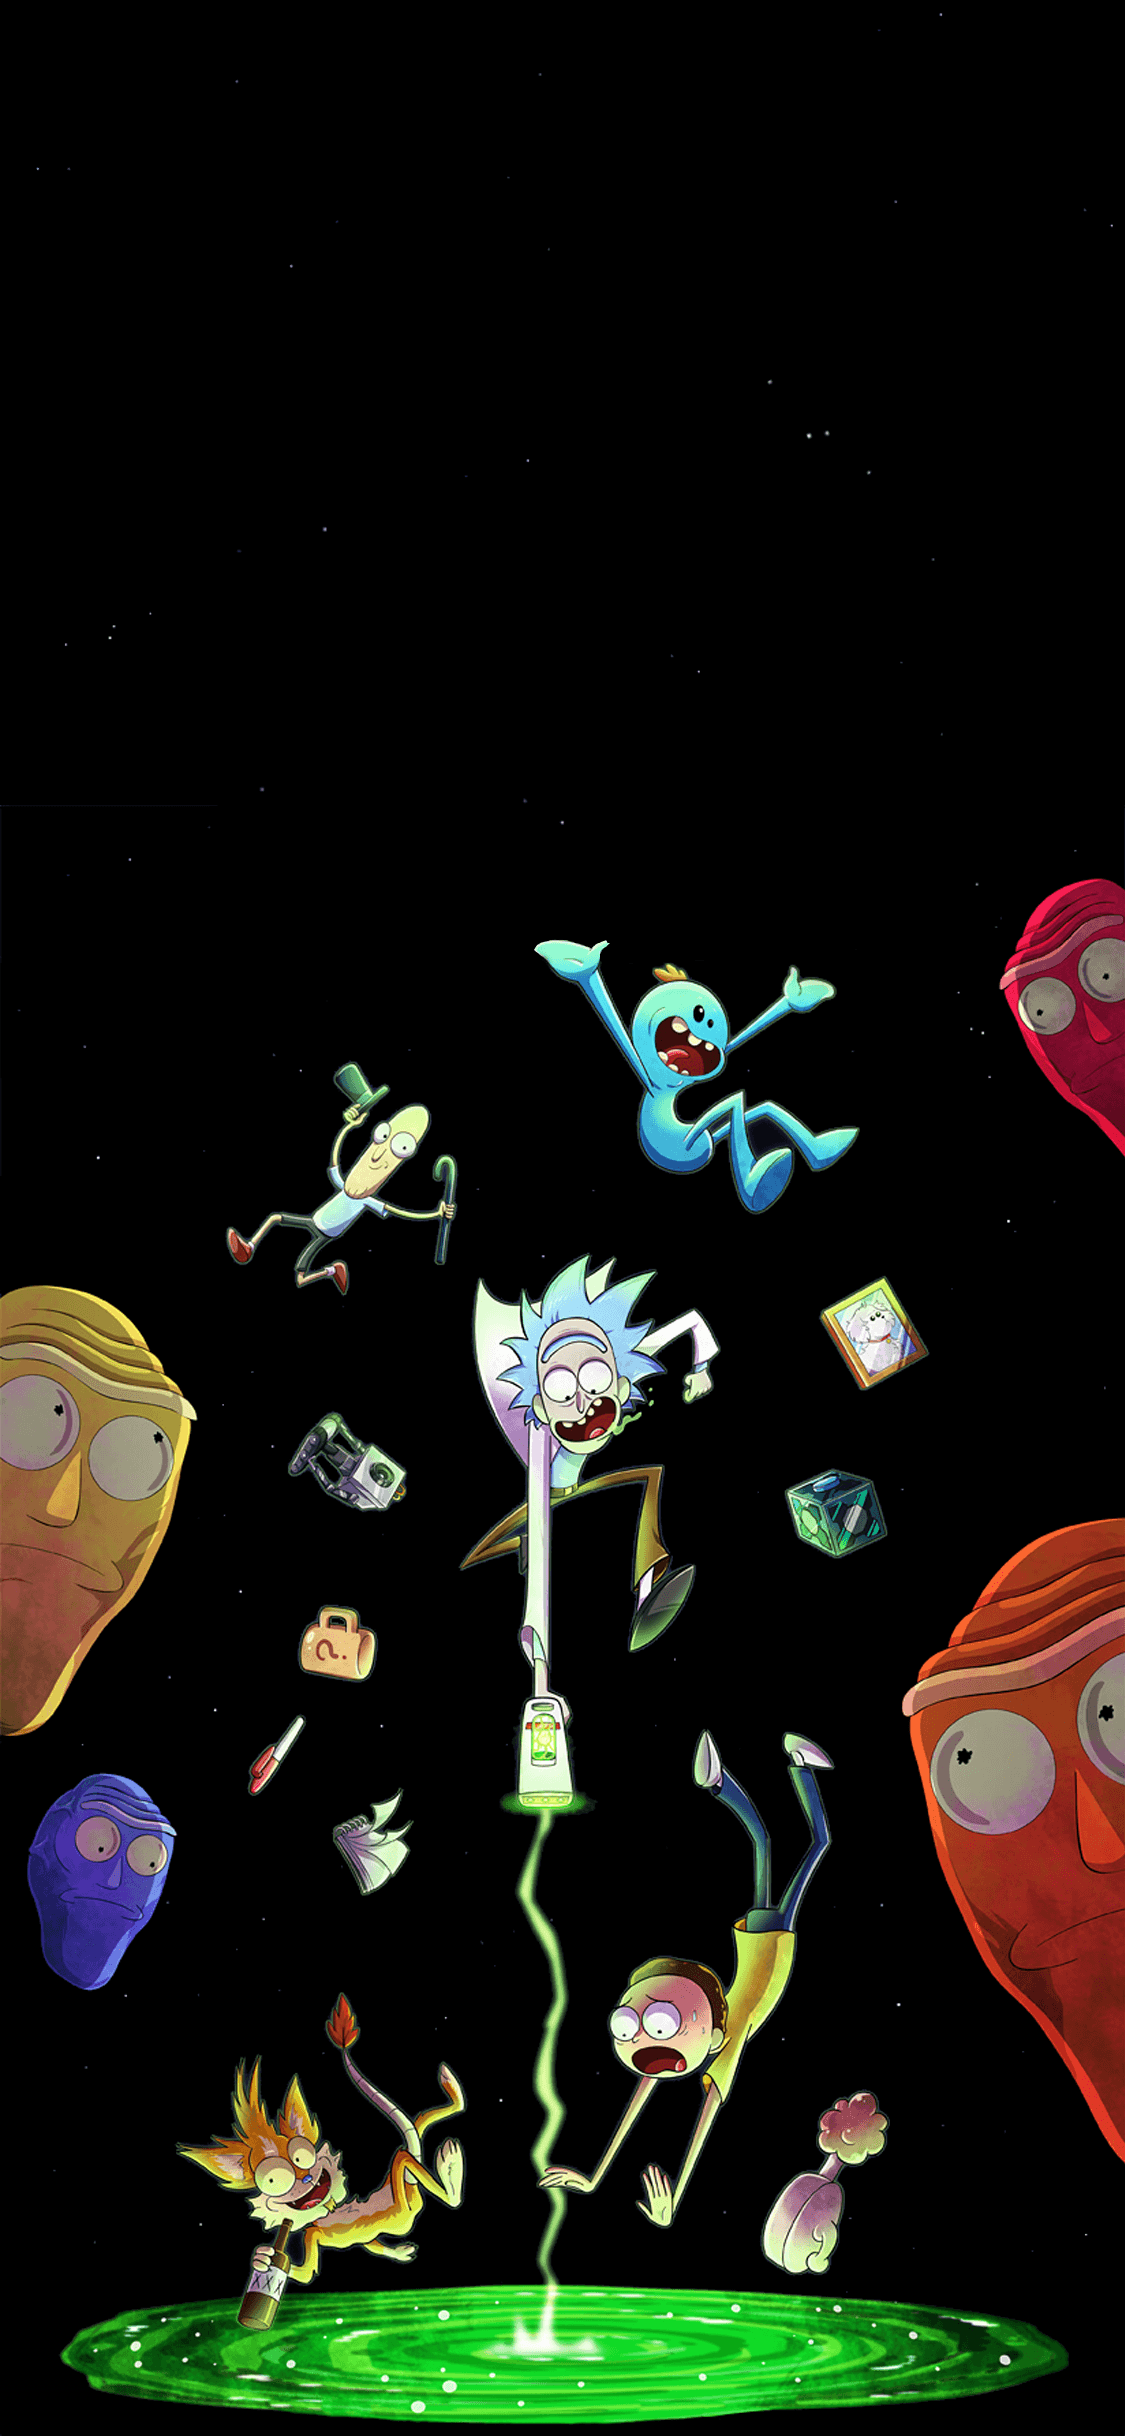 Amoled rick and morty wallpapers